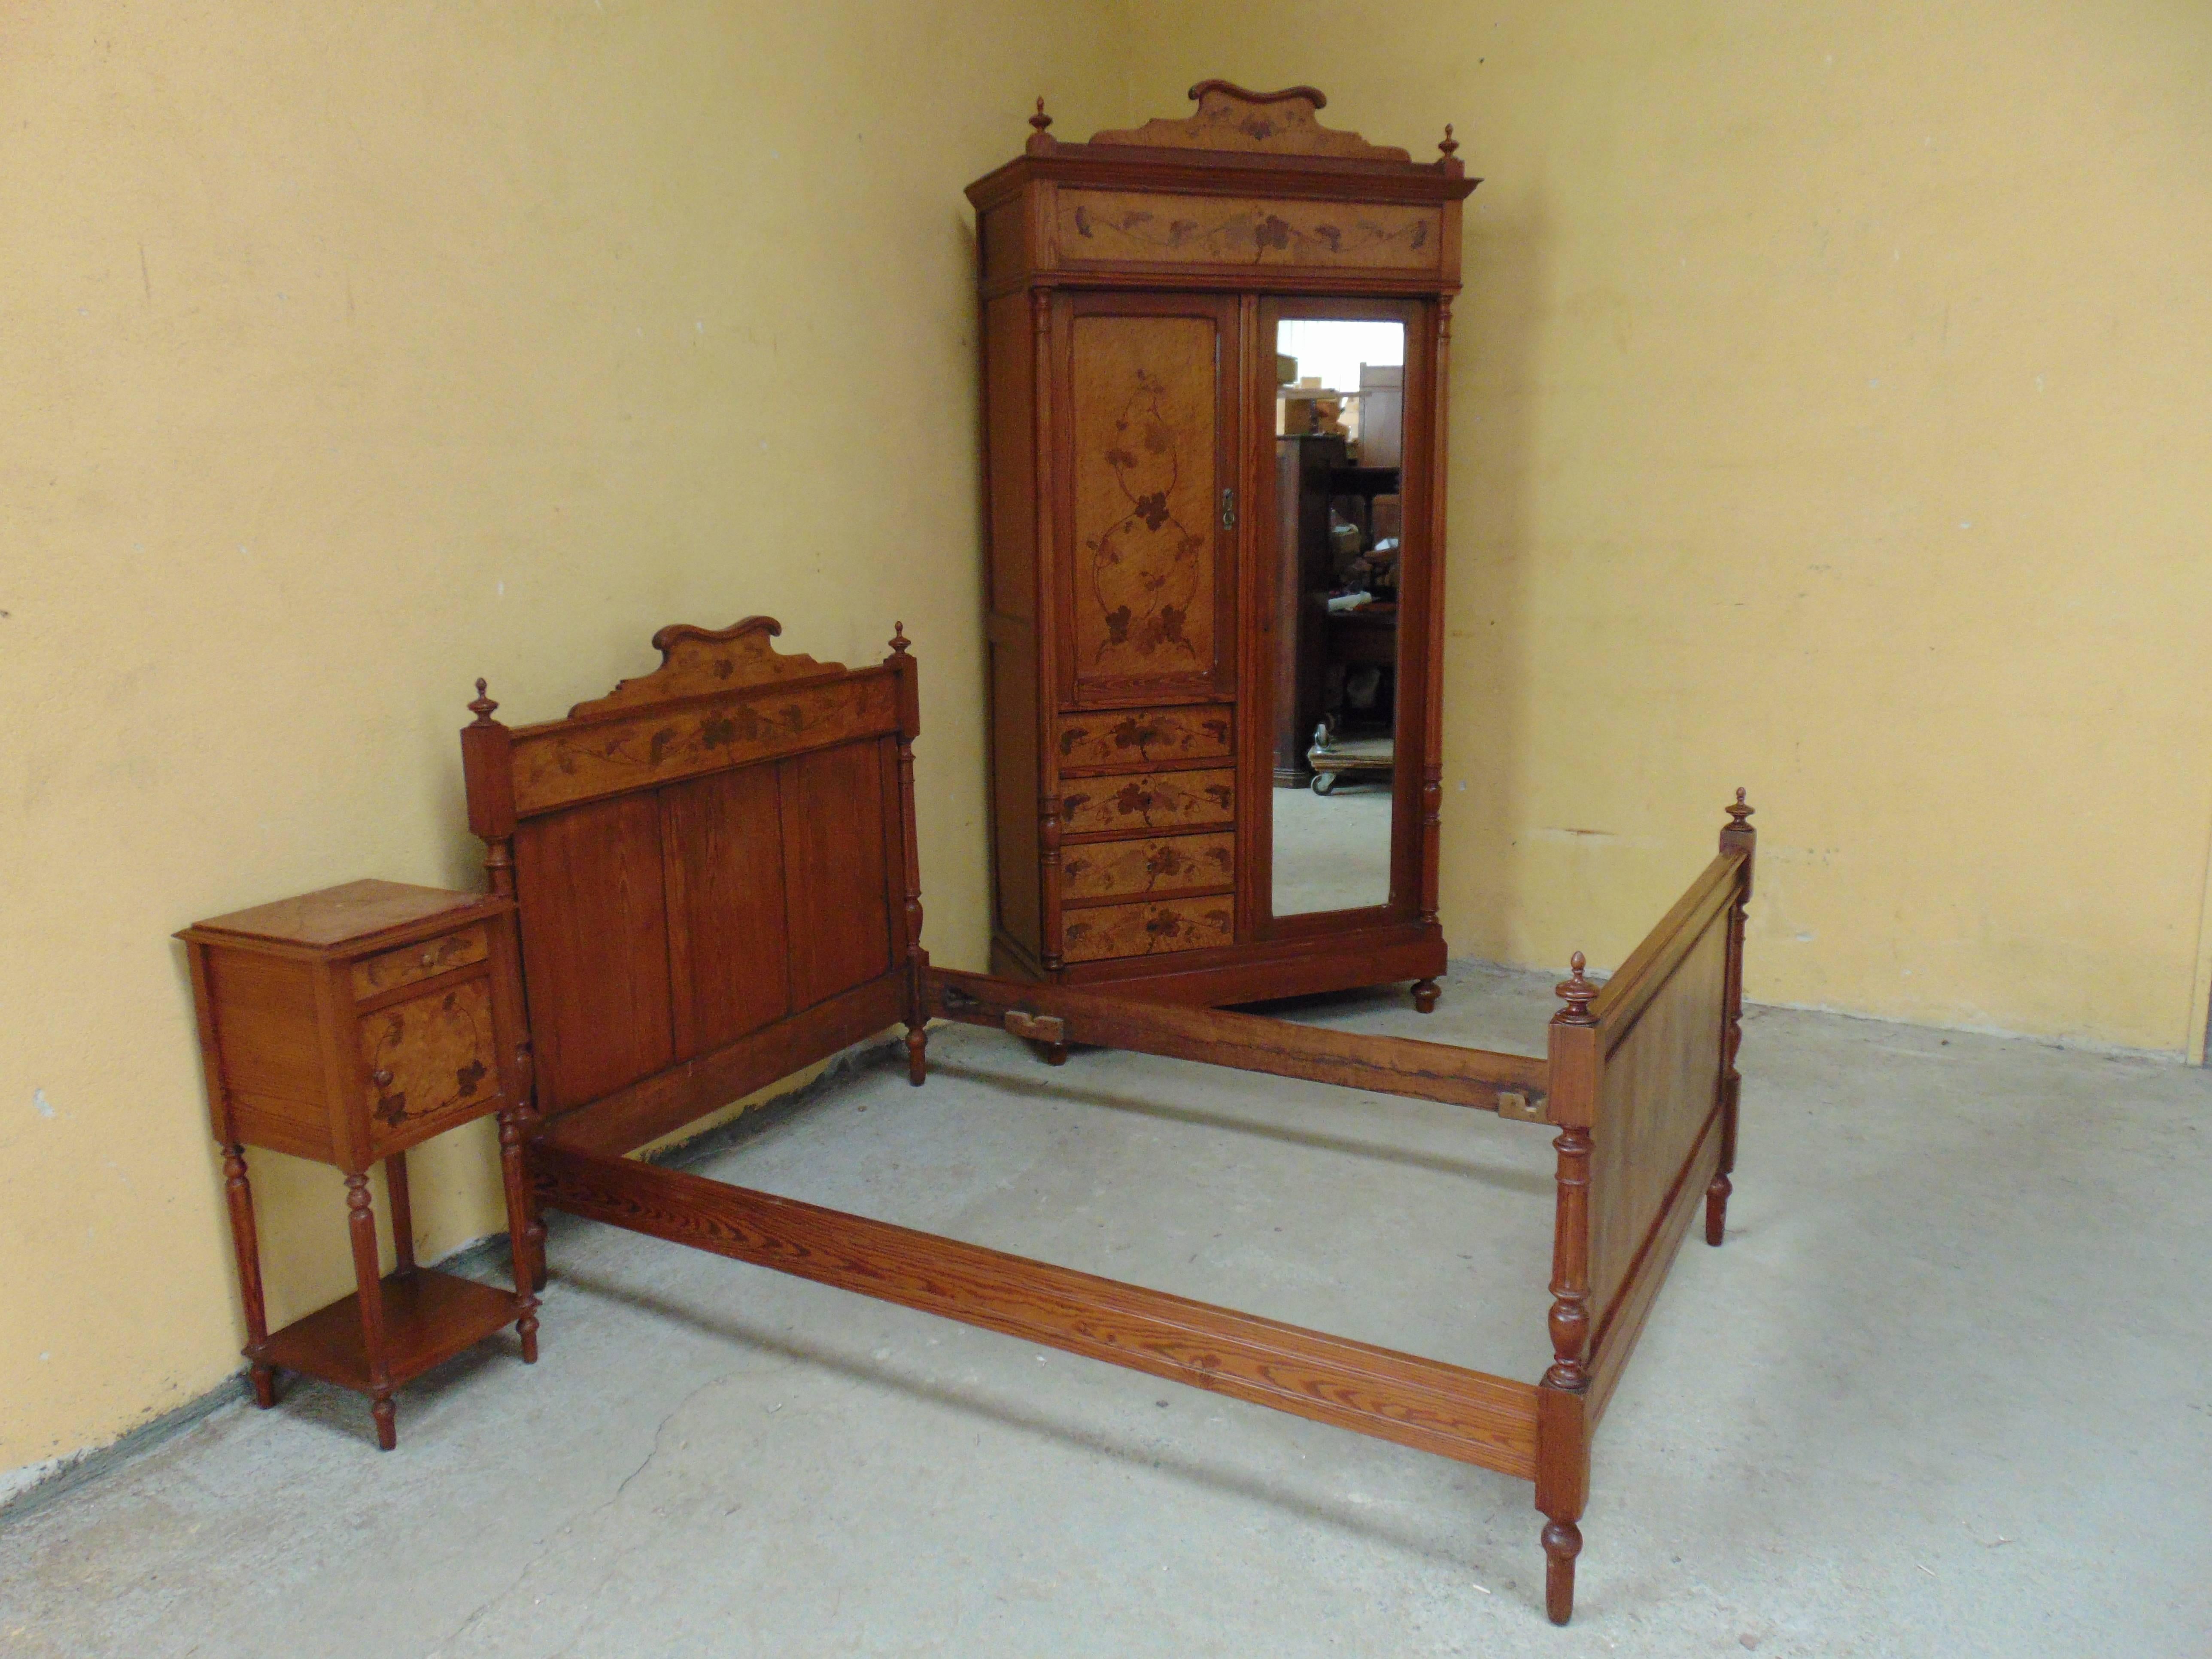 This charming and beautiful suite made in the Art Nouveau style circa 1910 will be perfect for a single person or child. With marquetry inlay in, harewood, bird's-eye maple, box and other fine woods. 
Consisting of bed, armoire and bedside cabinet